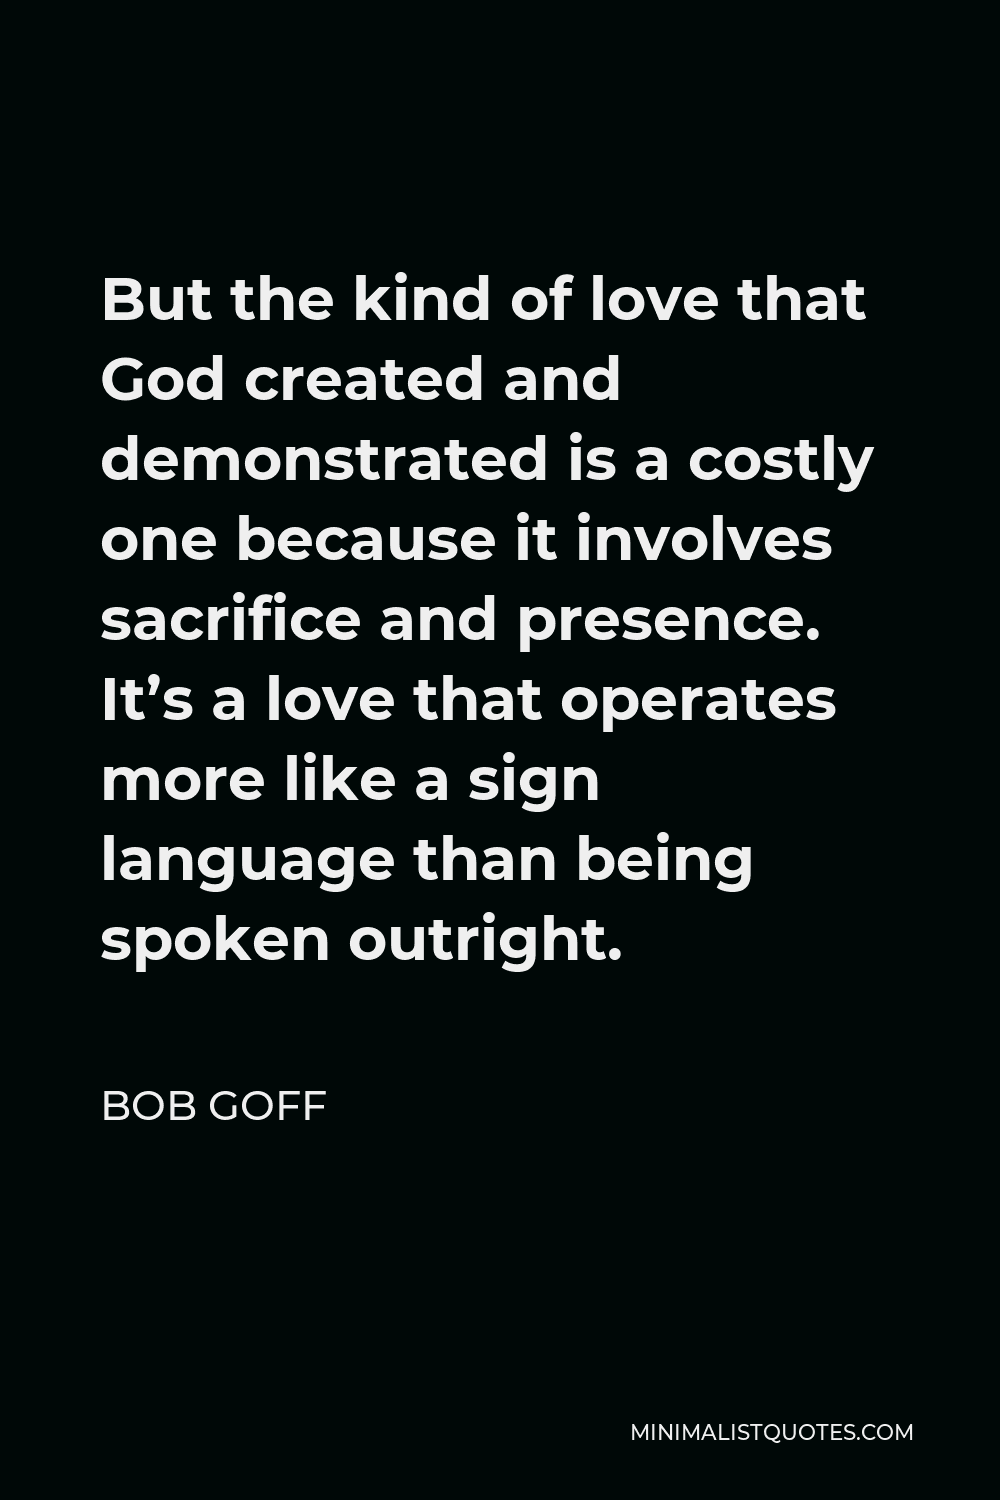 Bob Goff Quote - But the kind of love that God created and demonstrated is a costly one because it involves sacrifice and presence. It’s a love that operates more like a sign language than being spoken outright.